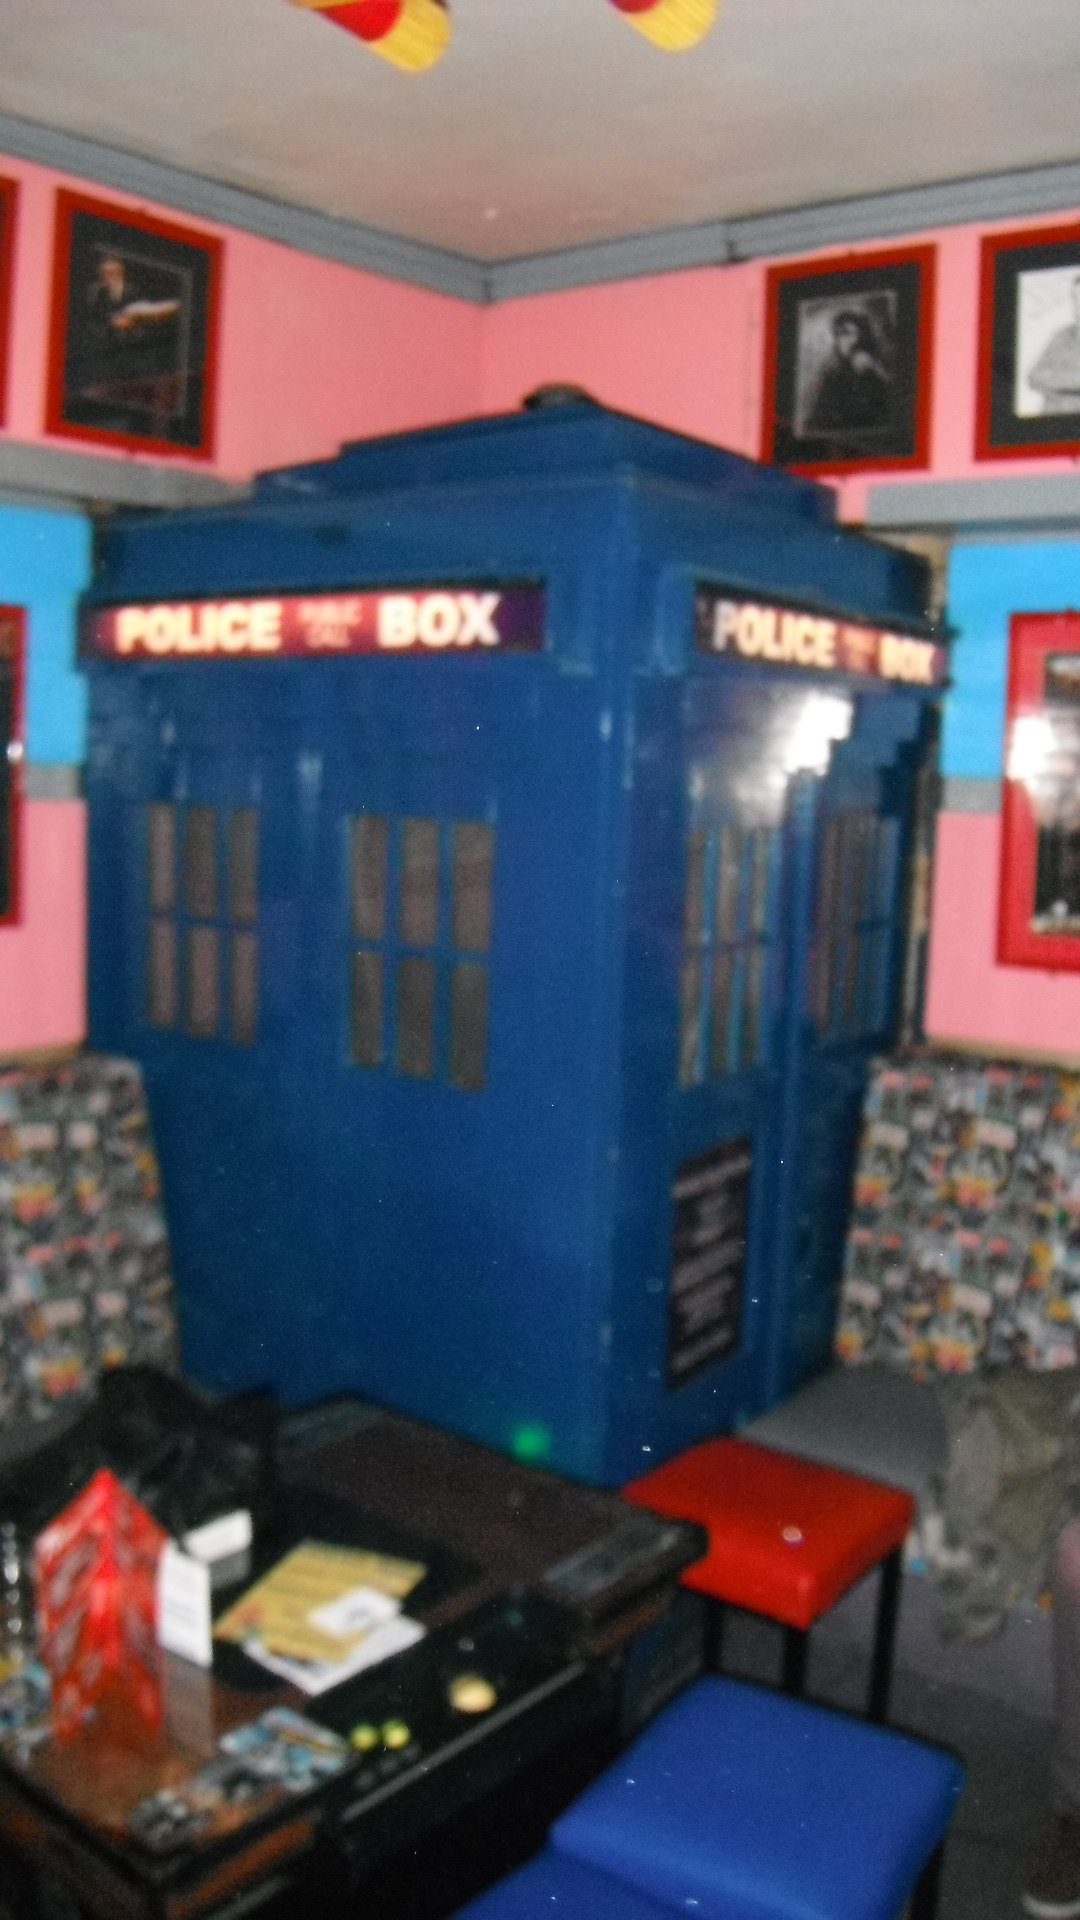 Photo taken by me – Dr Who TARDIS in FAB Café, Manchester 